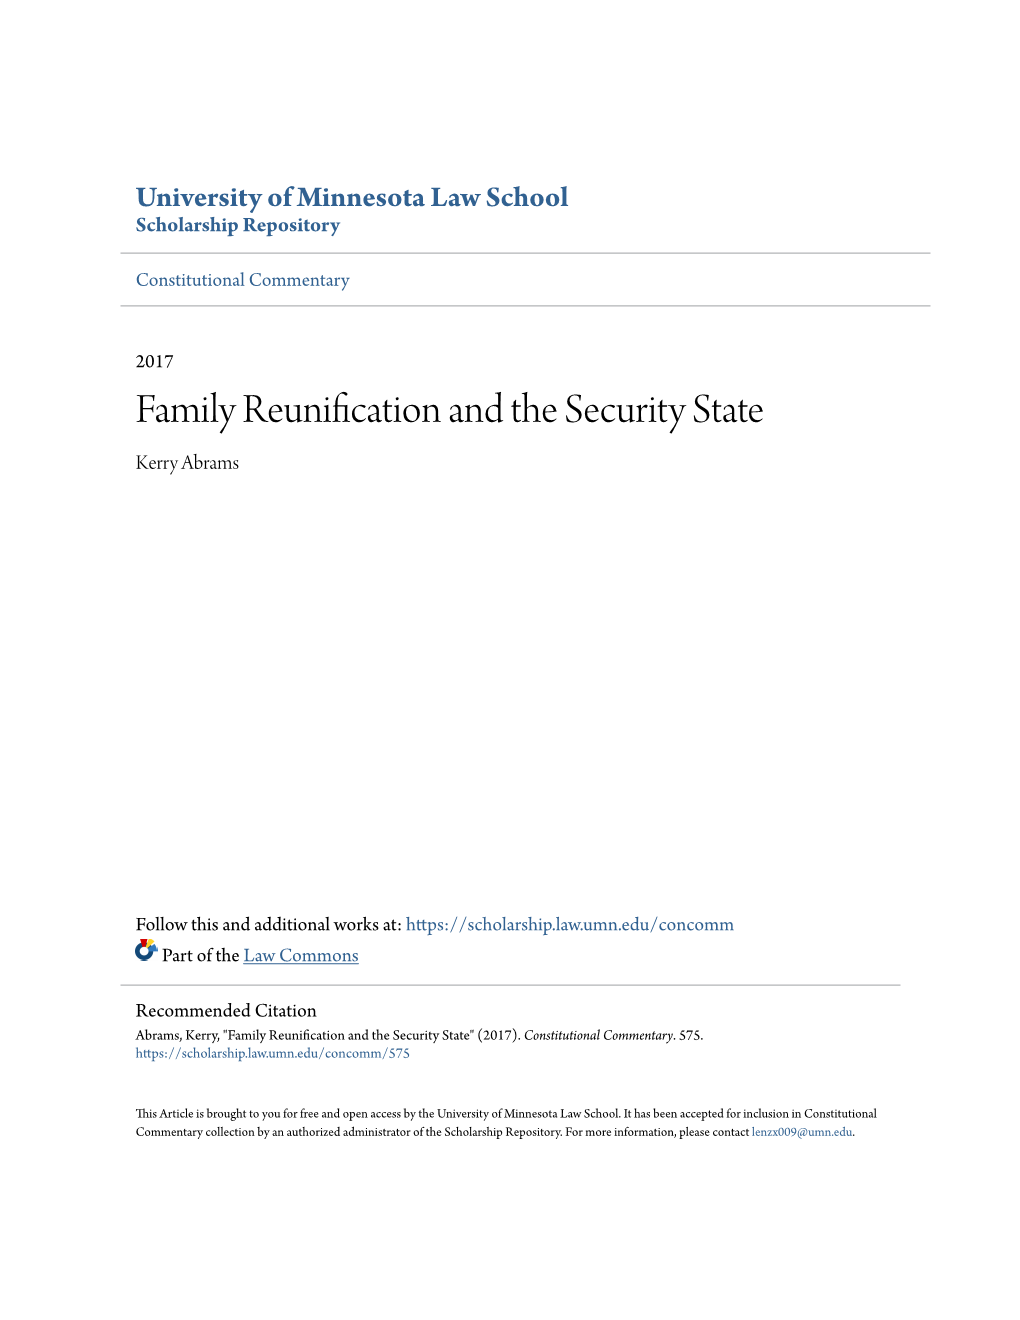 Family Reunification and the Security State Kerry Abrams